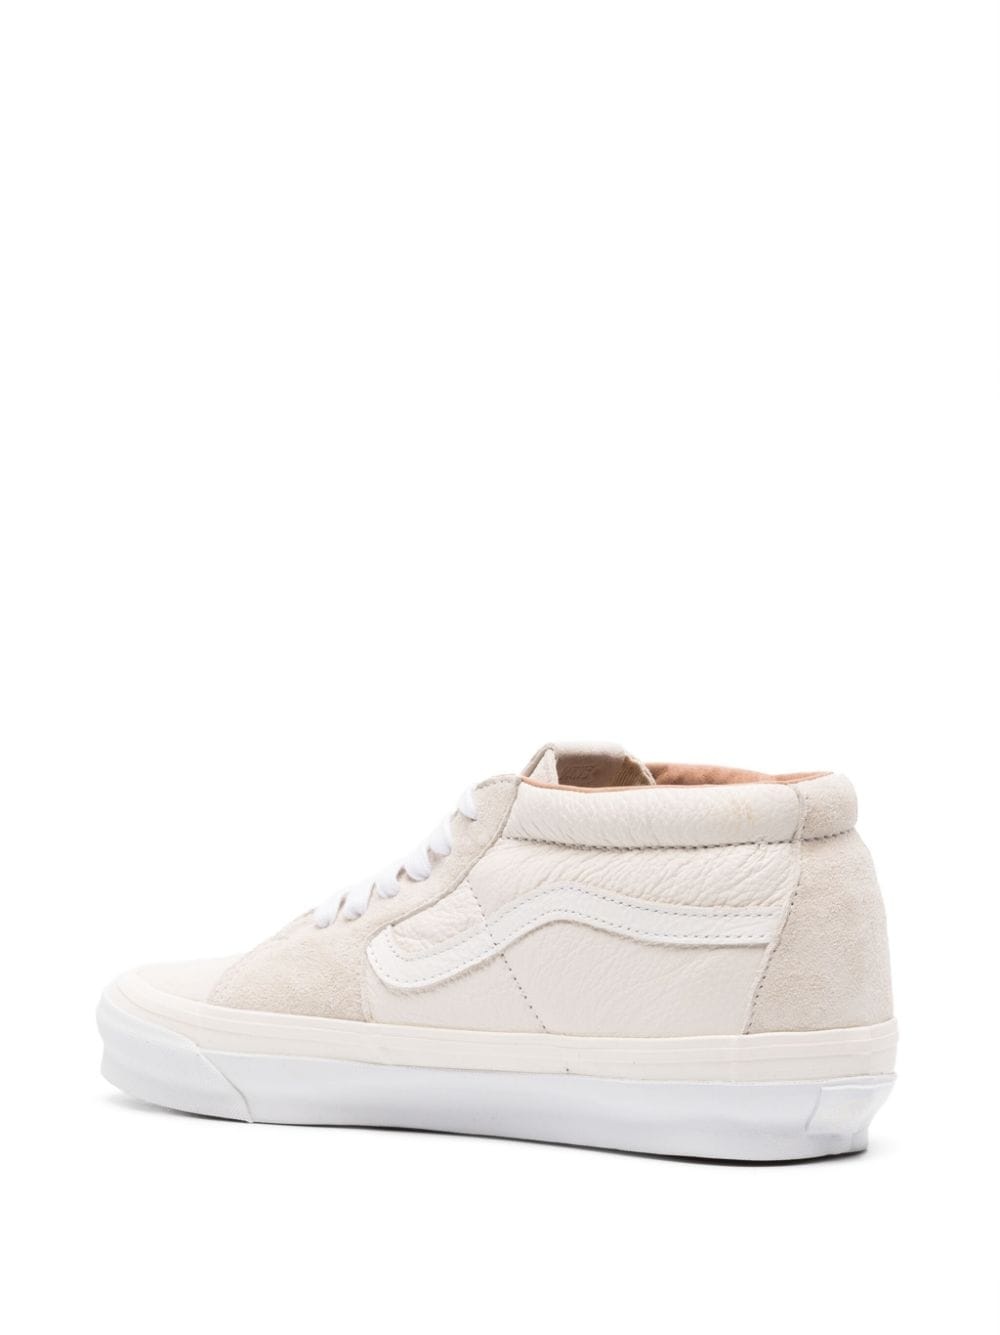 OG SK8-MID LX leather sneakers - 3